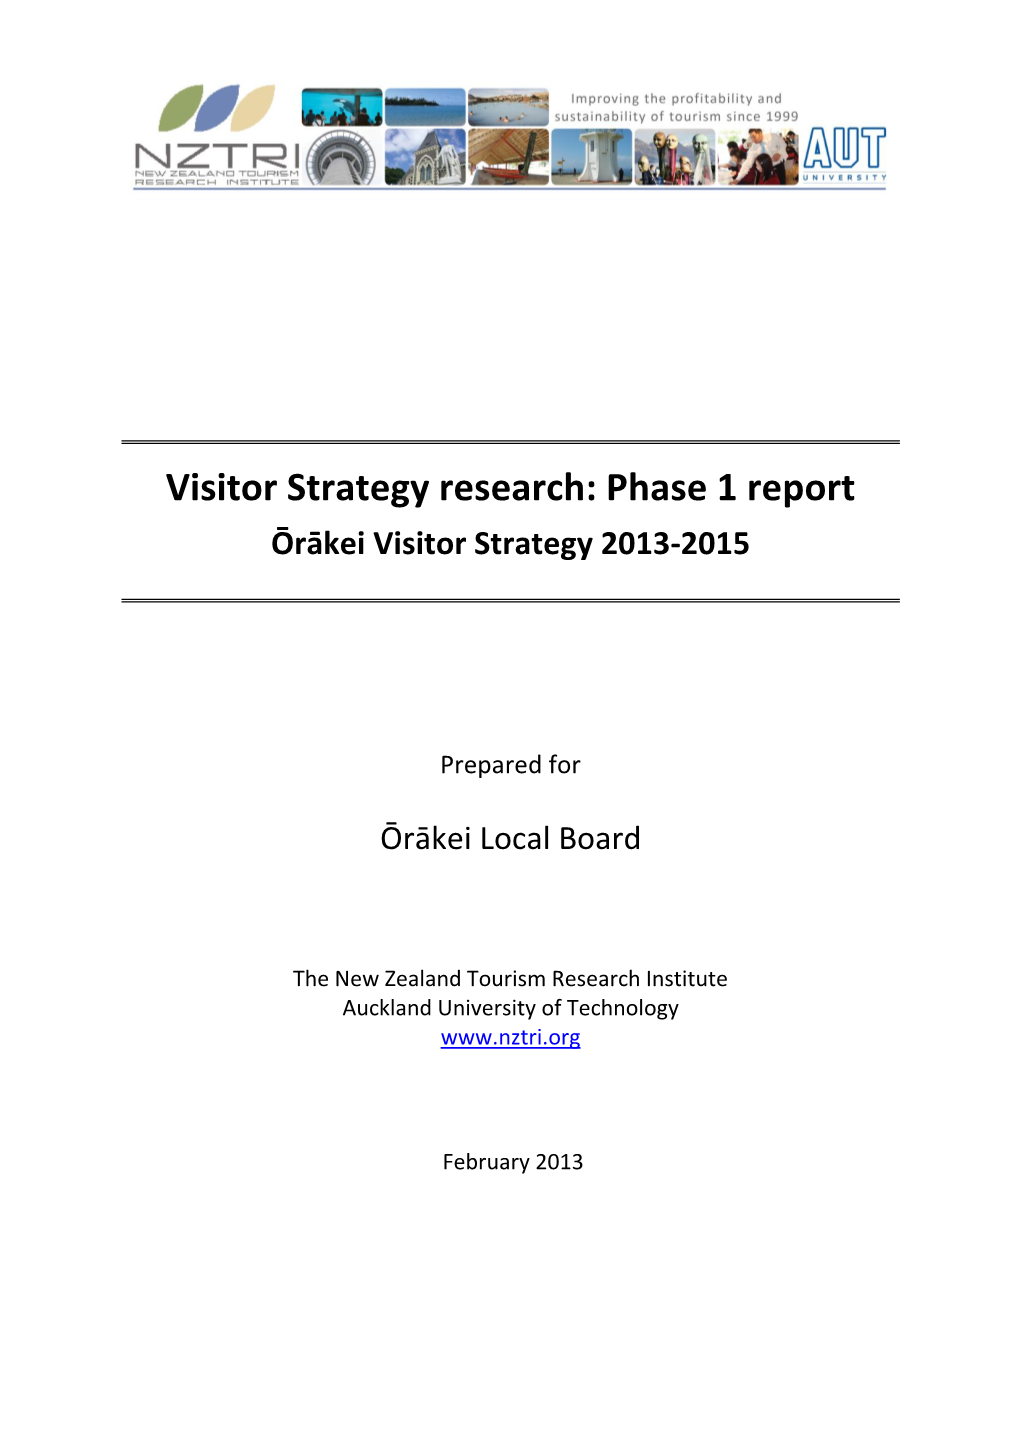 Visitor Strategy Research: Phase 1 Report Ōrākei Visitor Strategy 2013-2015